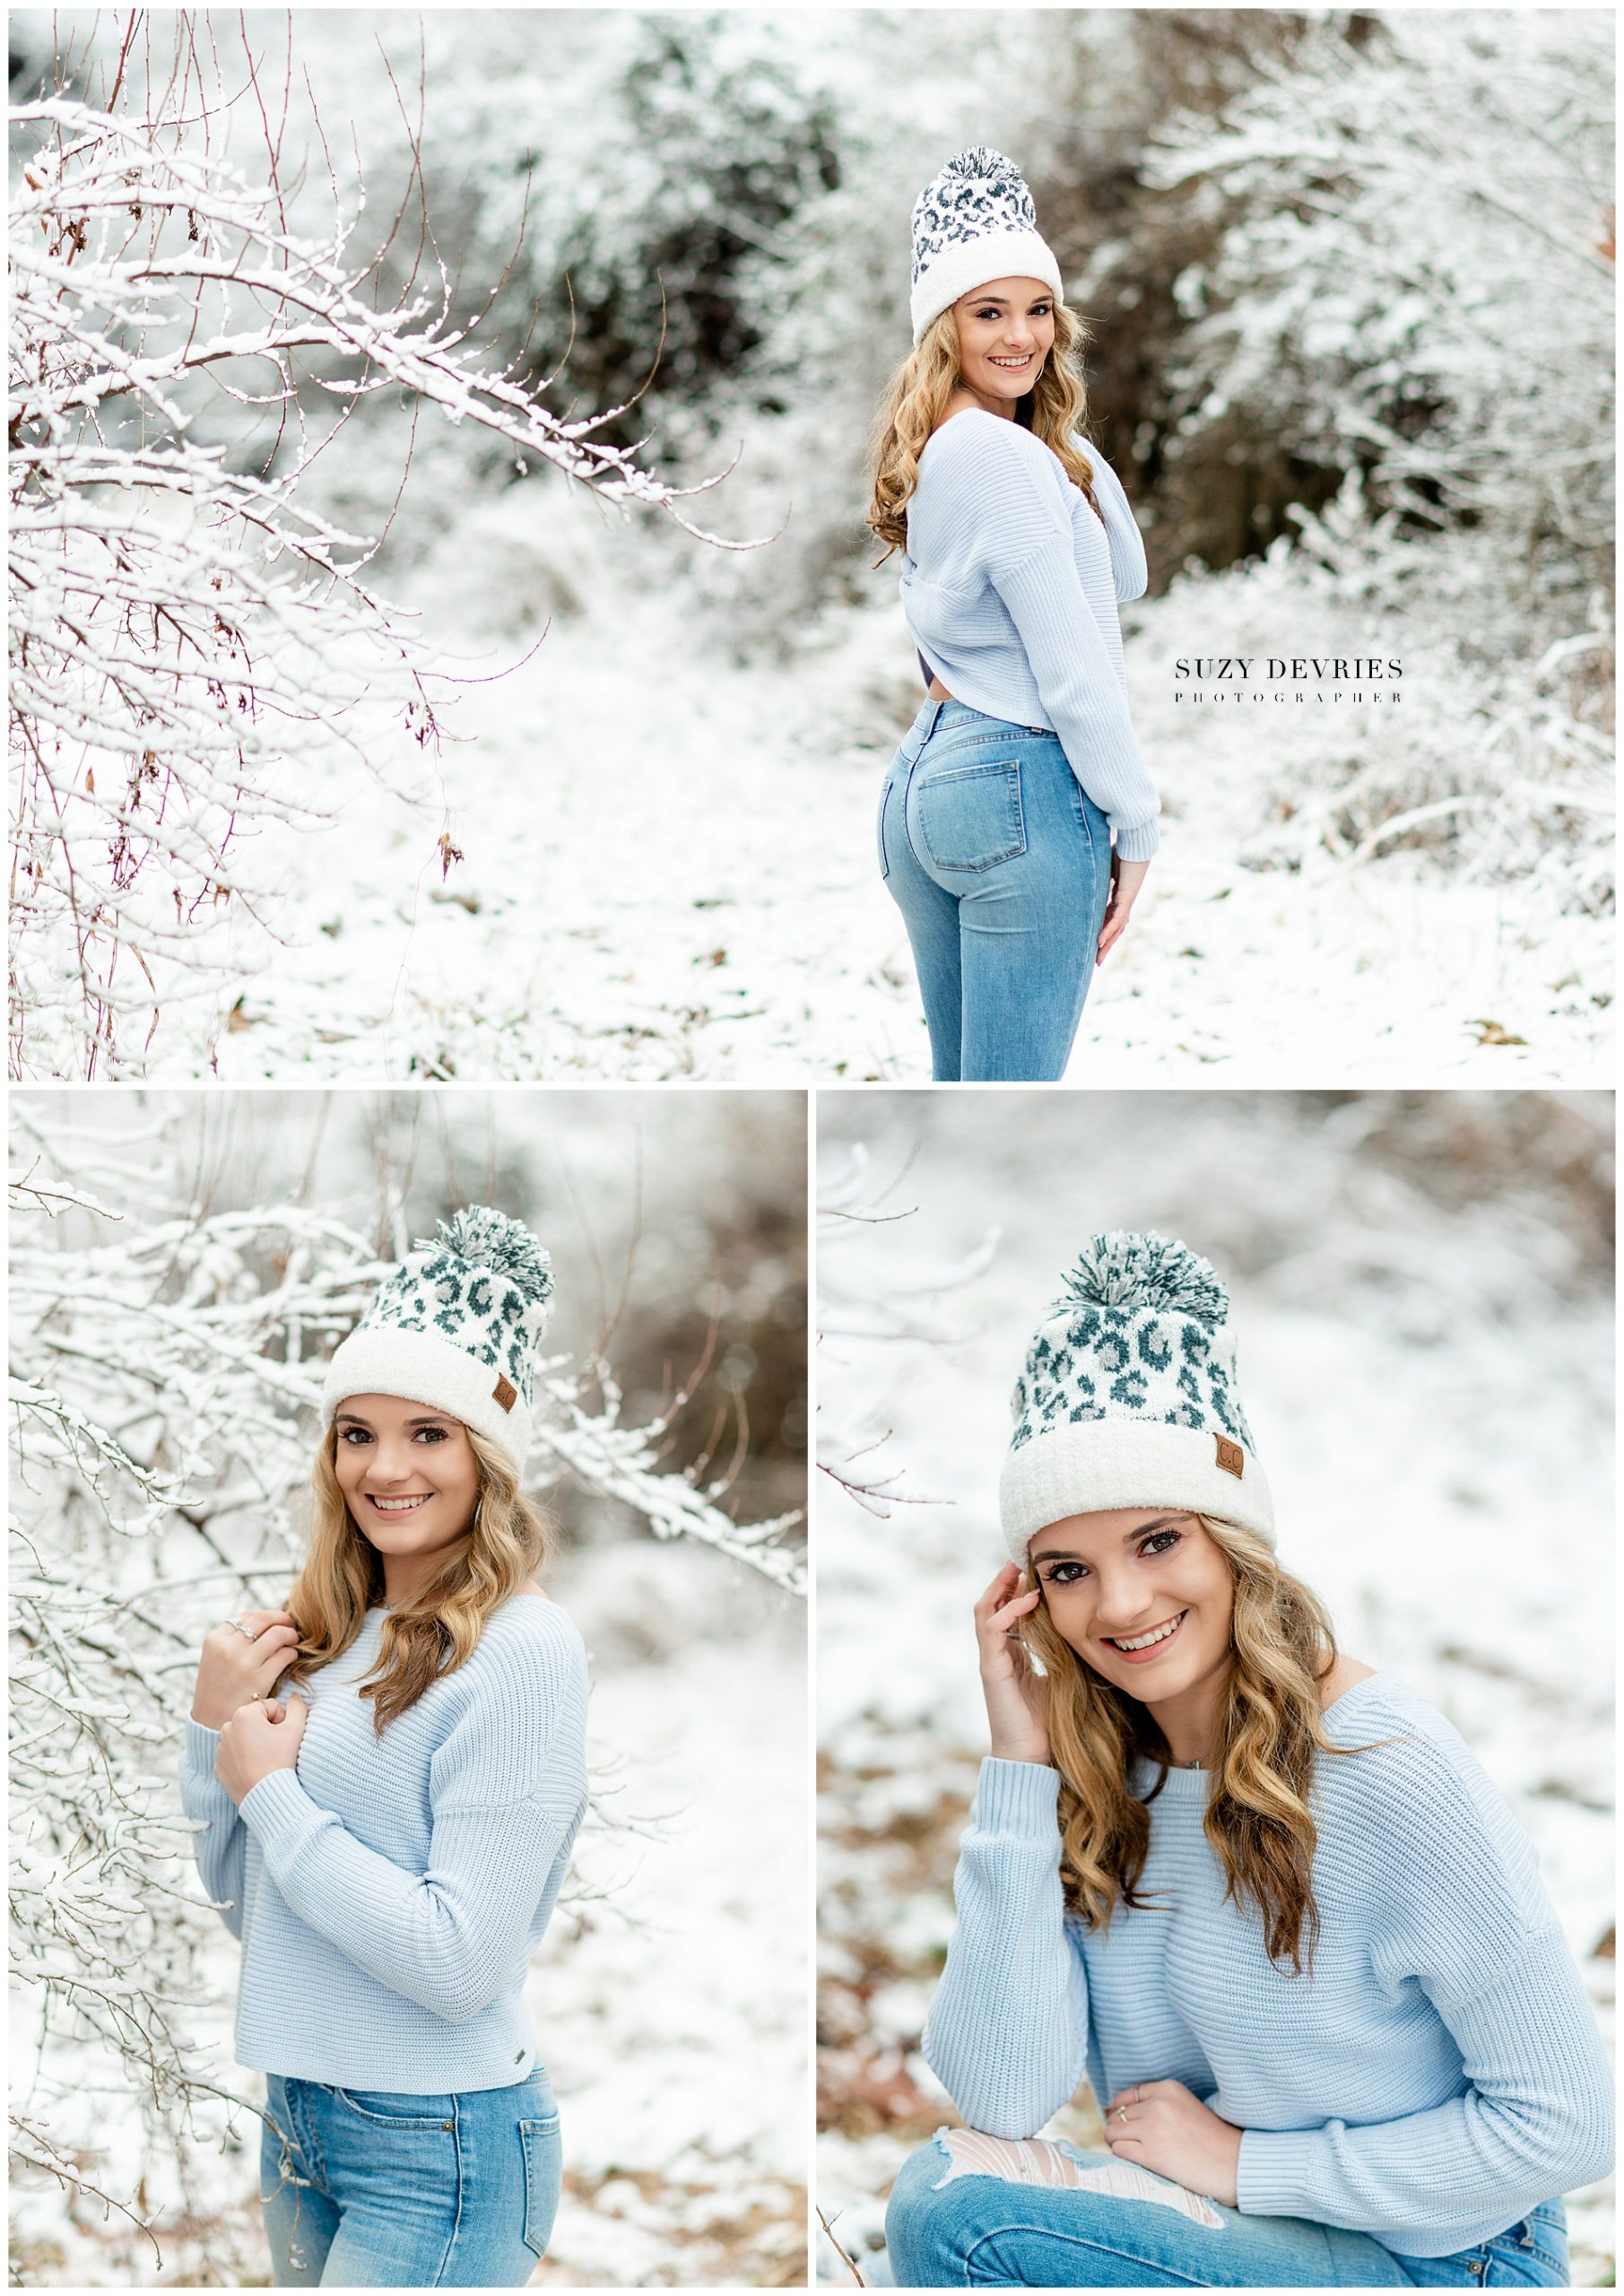 Edwardsville High School Senior girl in the snow wearing a blue sweater and leopard hat.